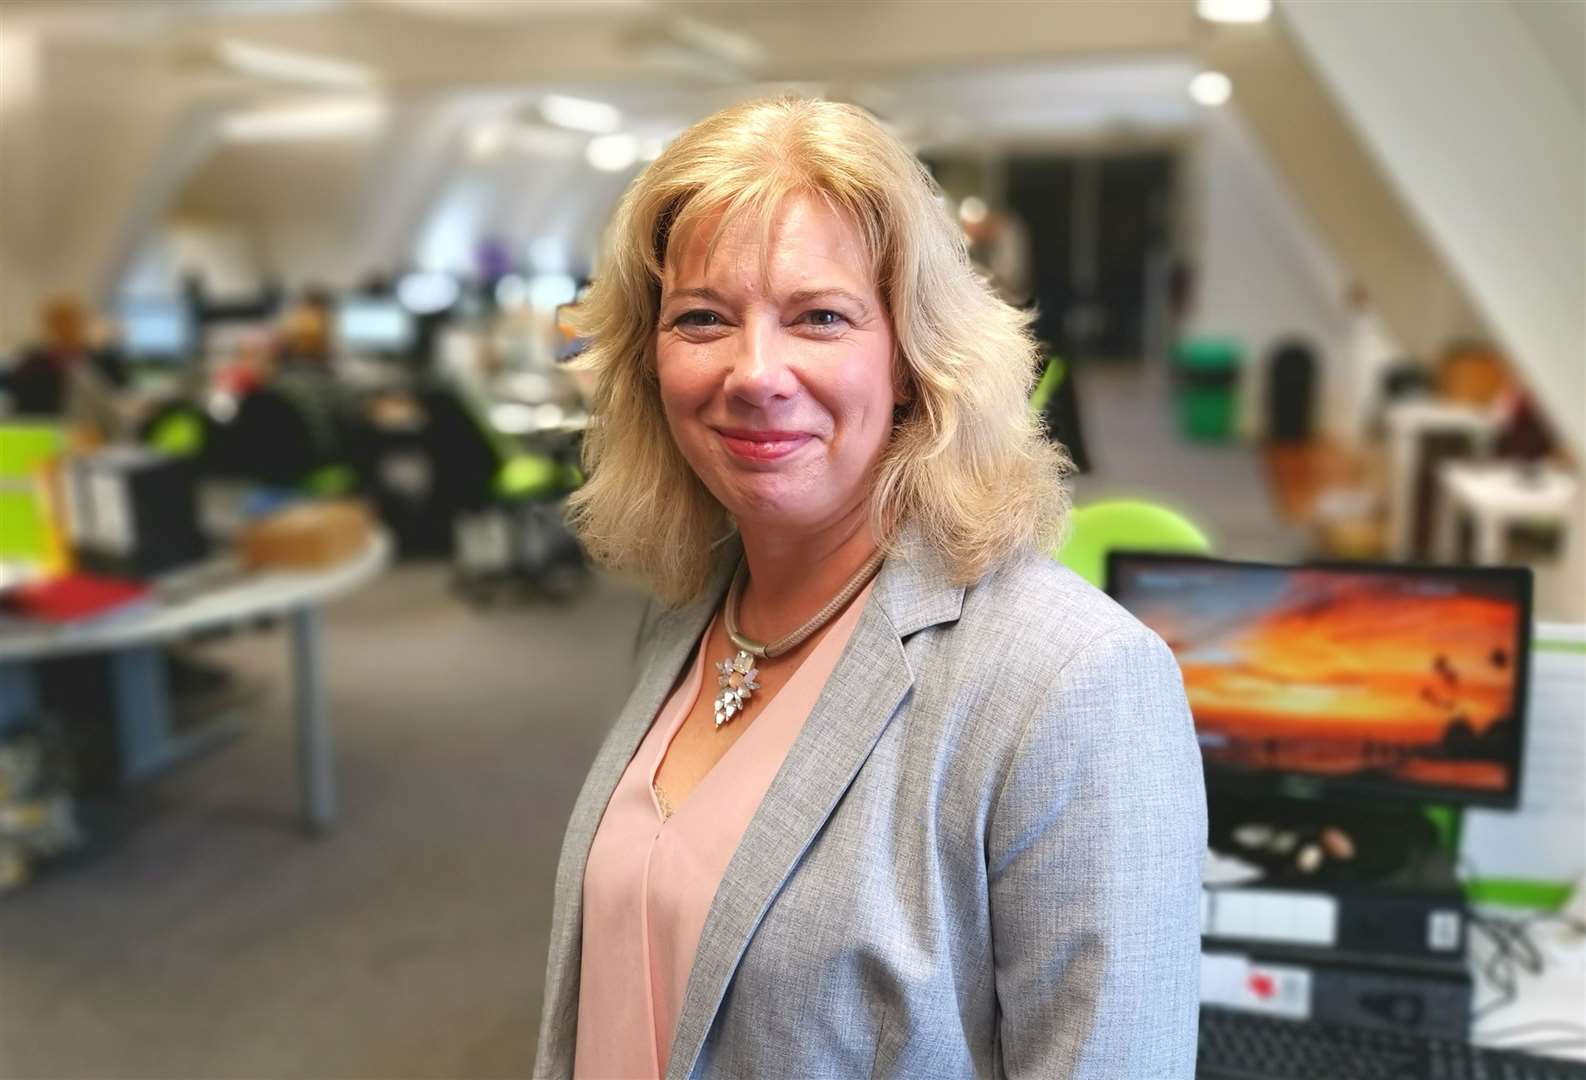 Deirdre Wells has been the chief executive of Visit Kent for the past 12 months